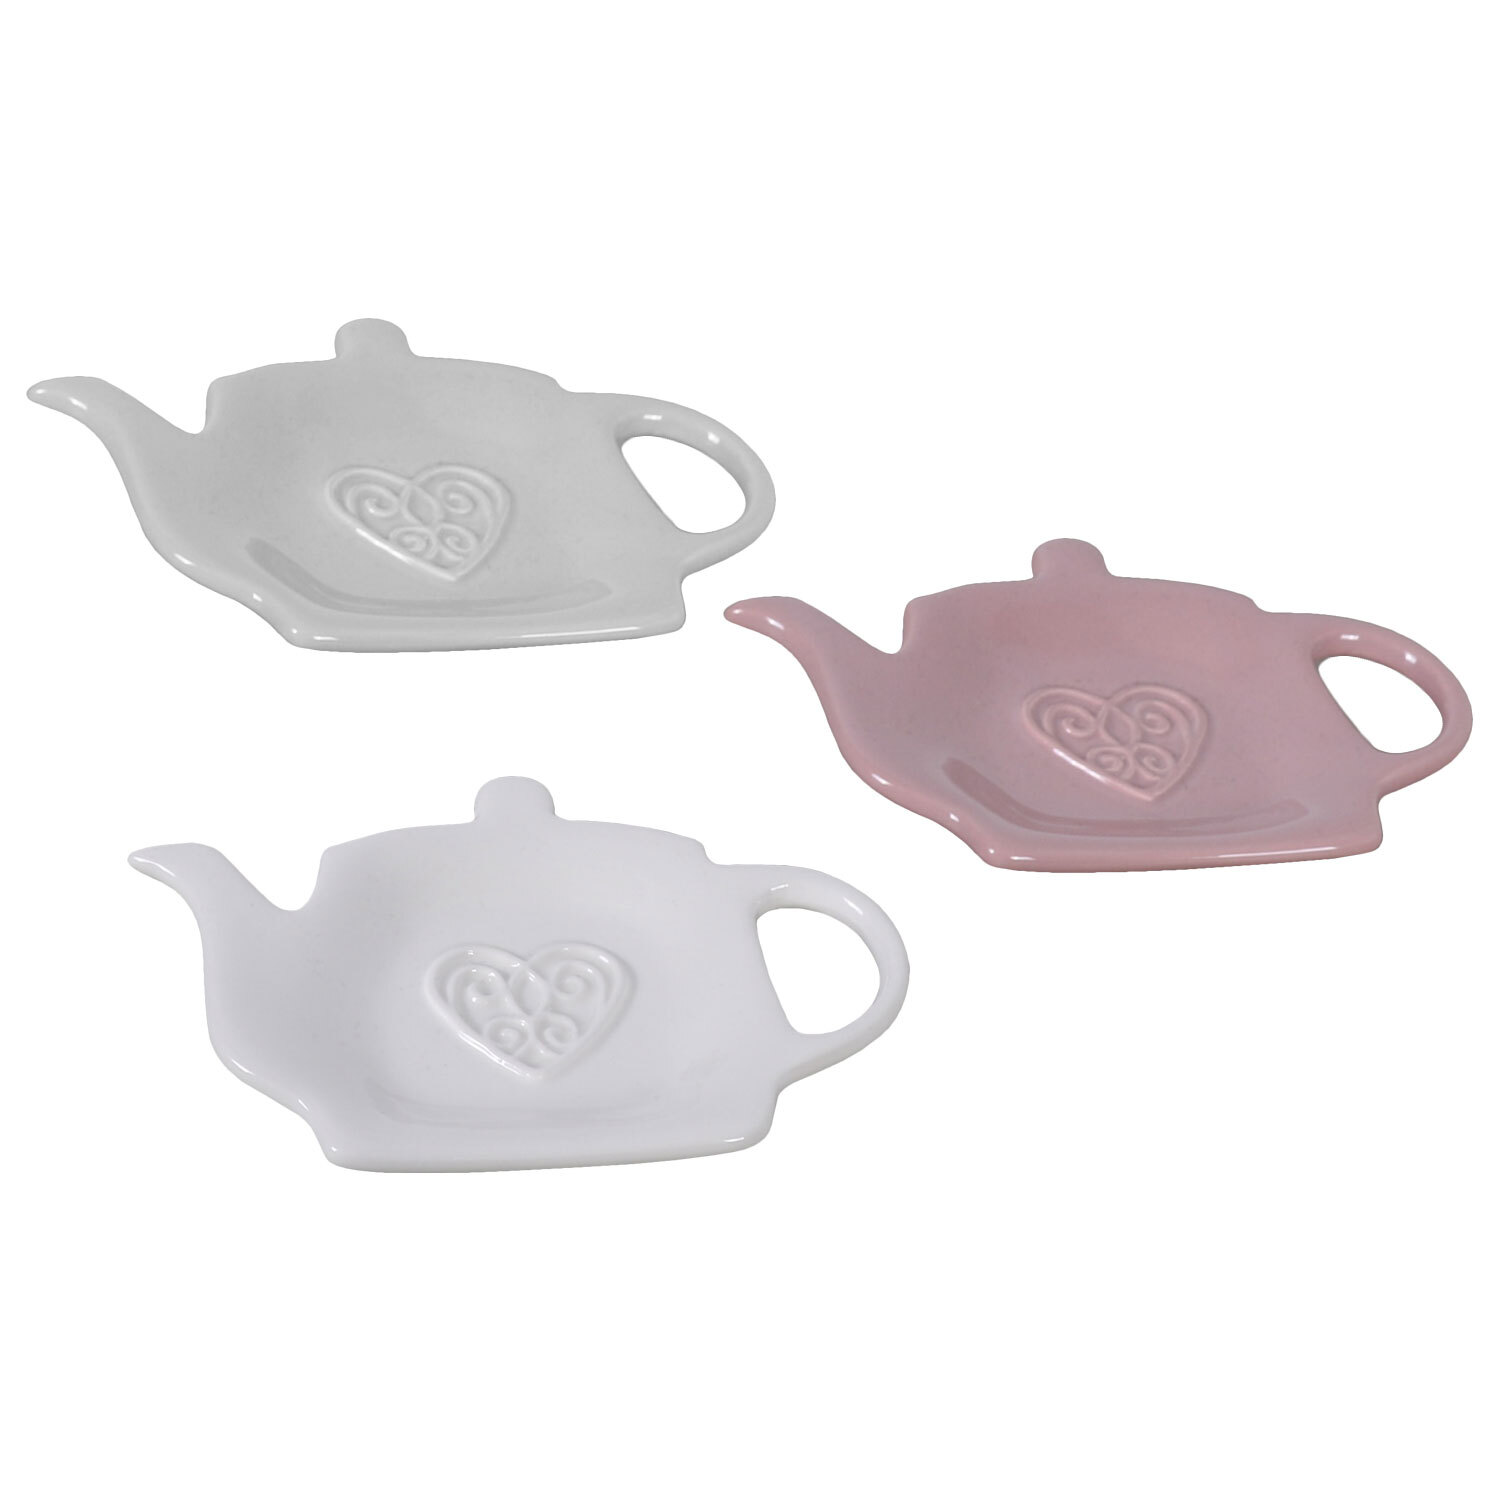 Single Embossed Heart Ceramic Teabag Tidy in Assorted styles Image 1